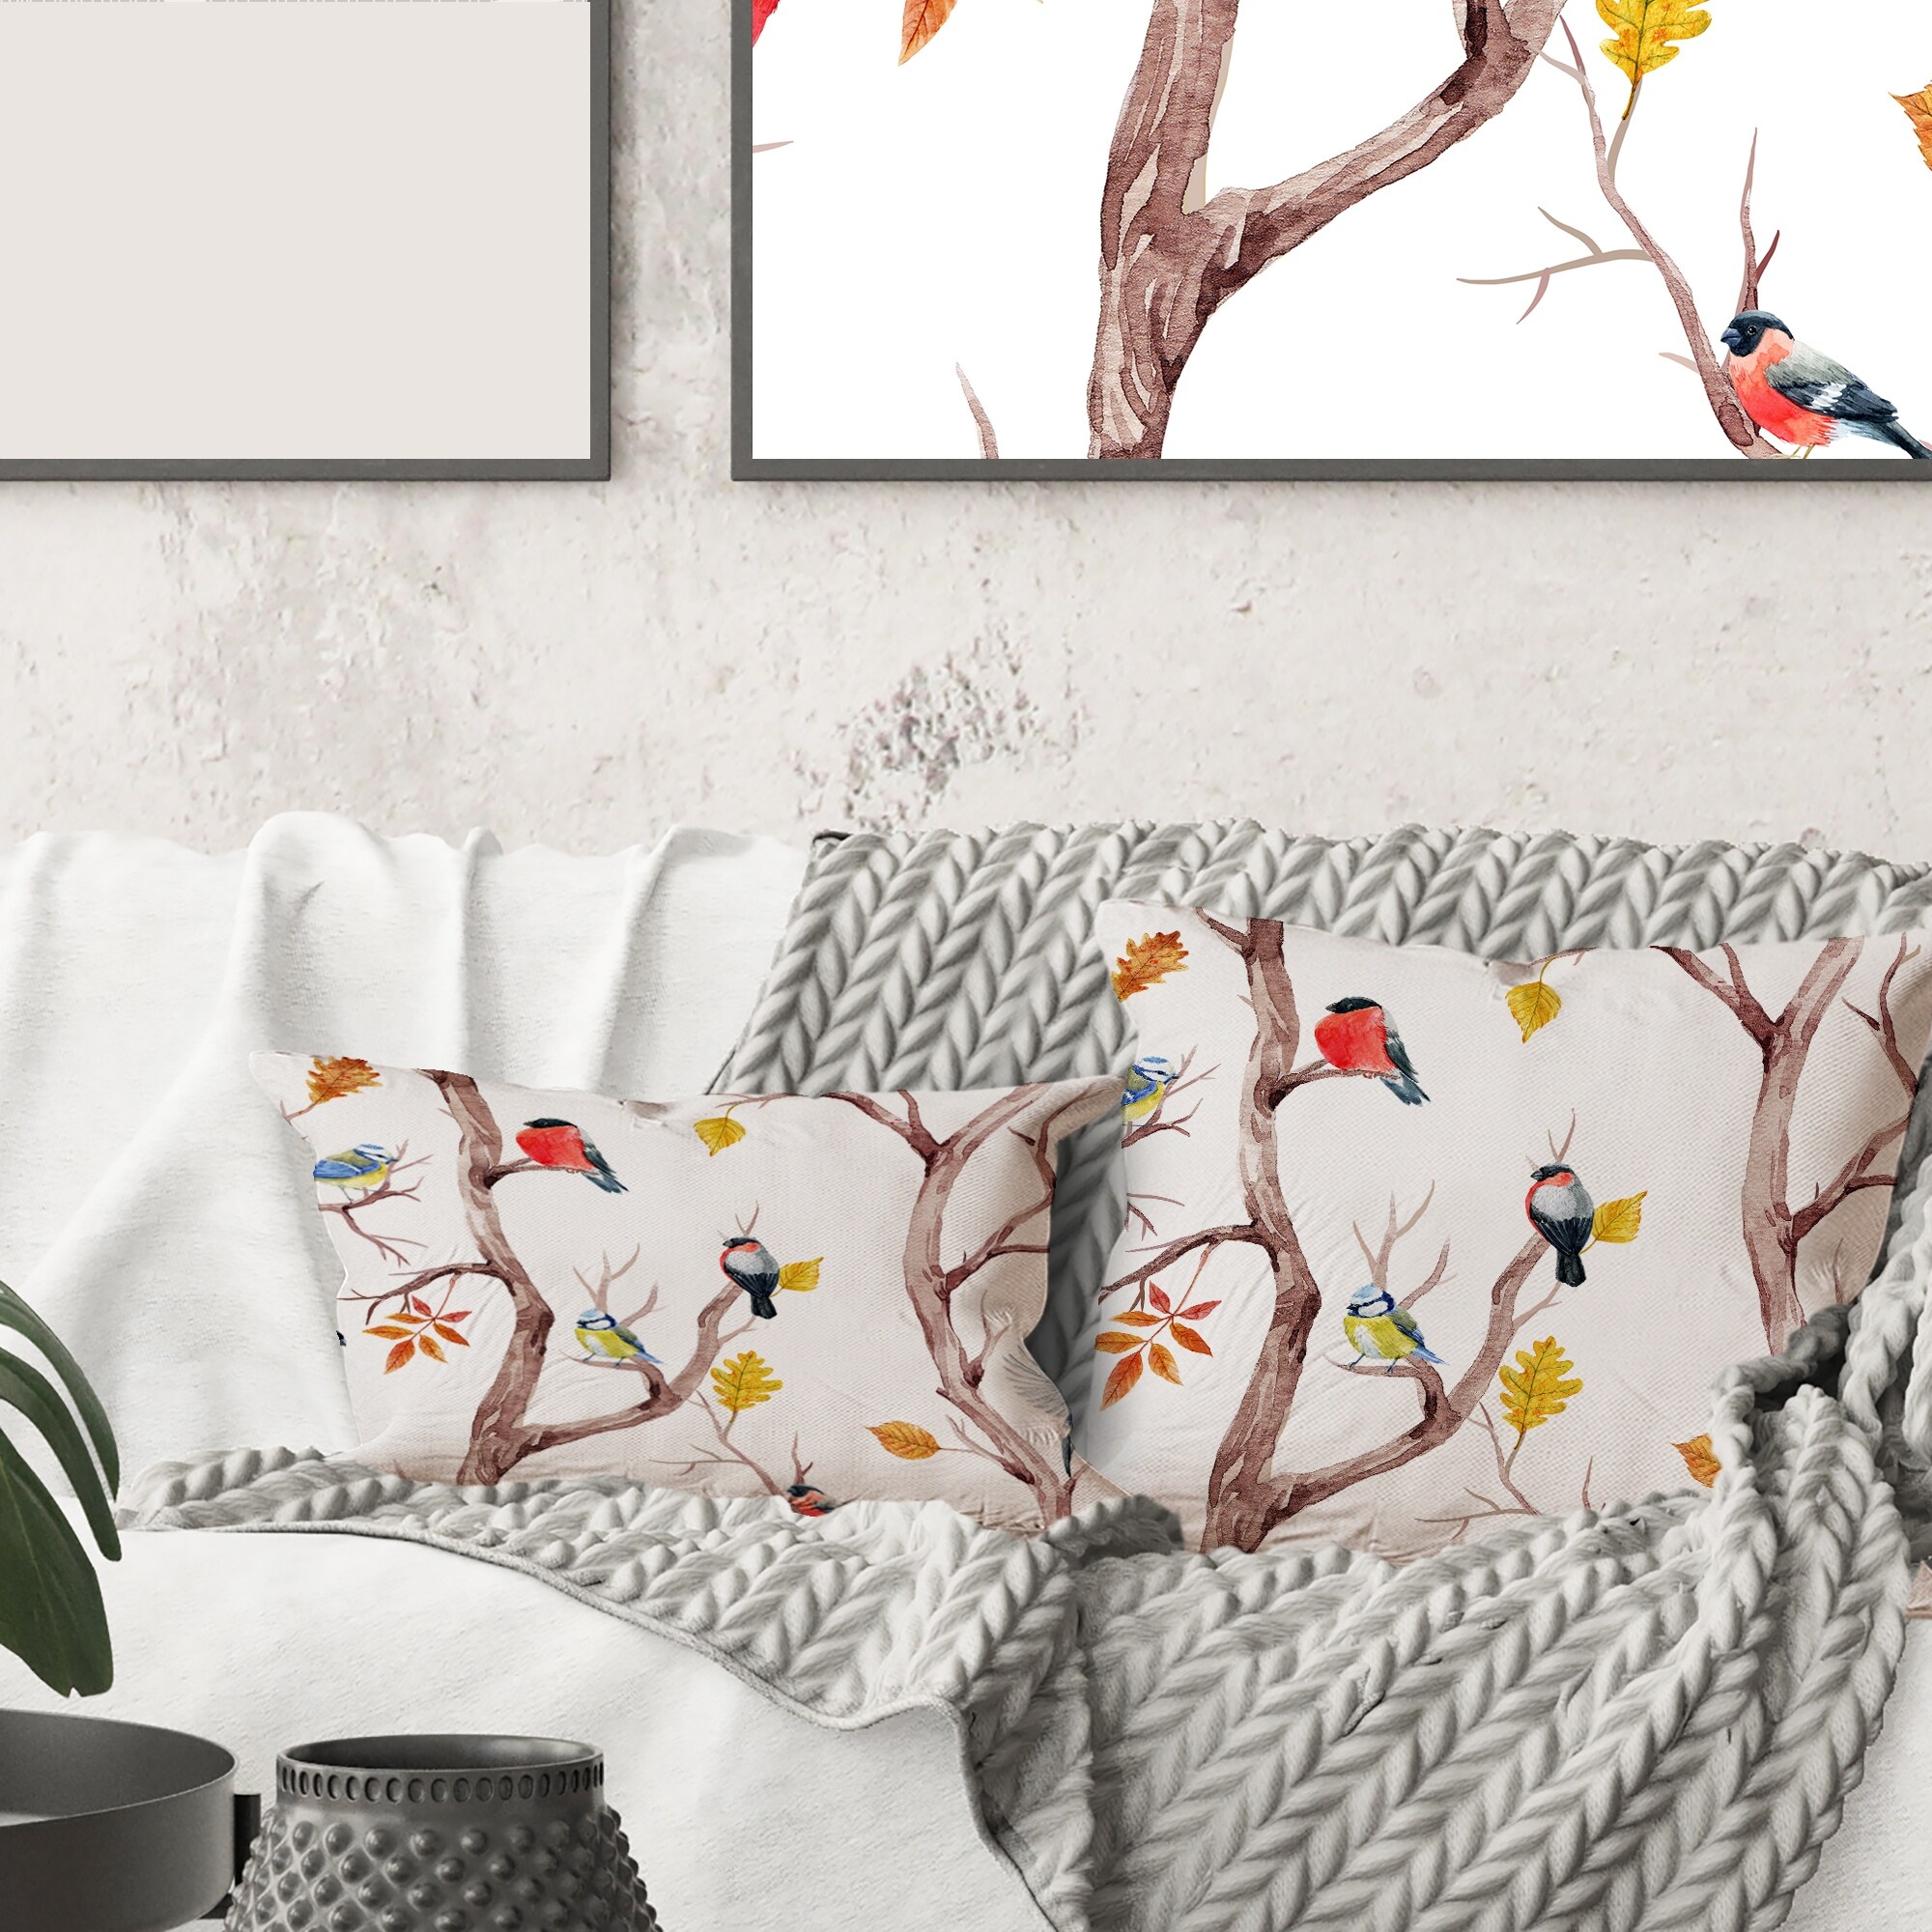 https://ak1.ostkcdn.com/images/products/is/images/direct/95082c78c6ed1af2e61da27bfb60fc318bf2b011/Designart-%27Fall-Trees-and-Little-Birds%27-Traditional-Printed-Throw-Pillow.jpg